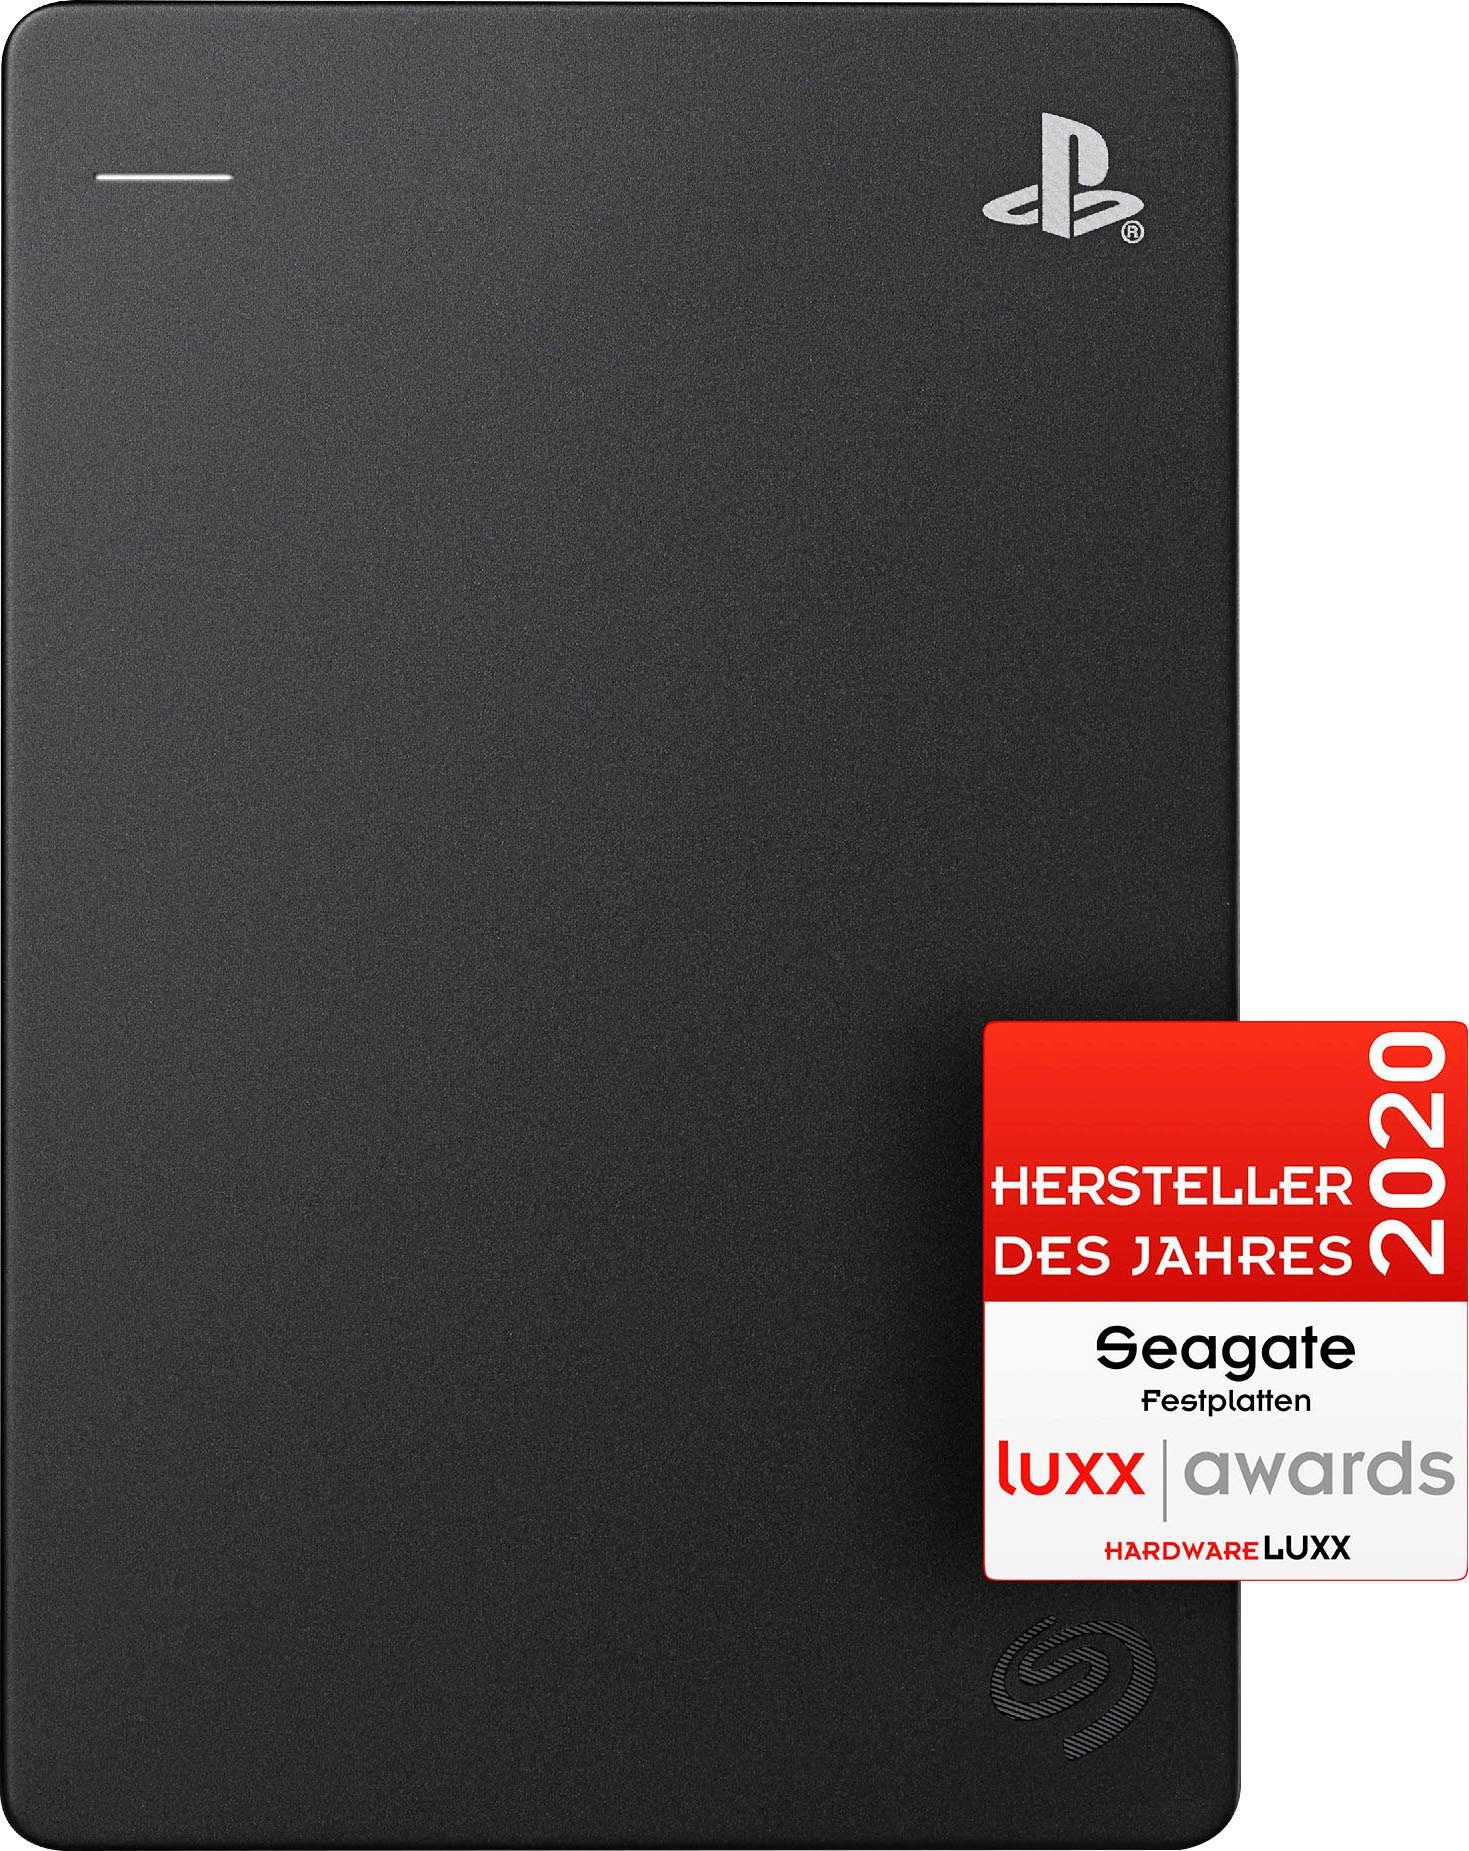 Game TB) 2,5" Gaming-Festplatte STGD2000200 externe Seagate PS4 (2 Drive